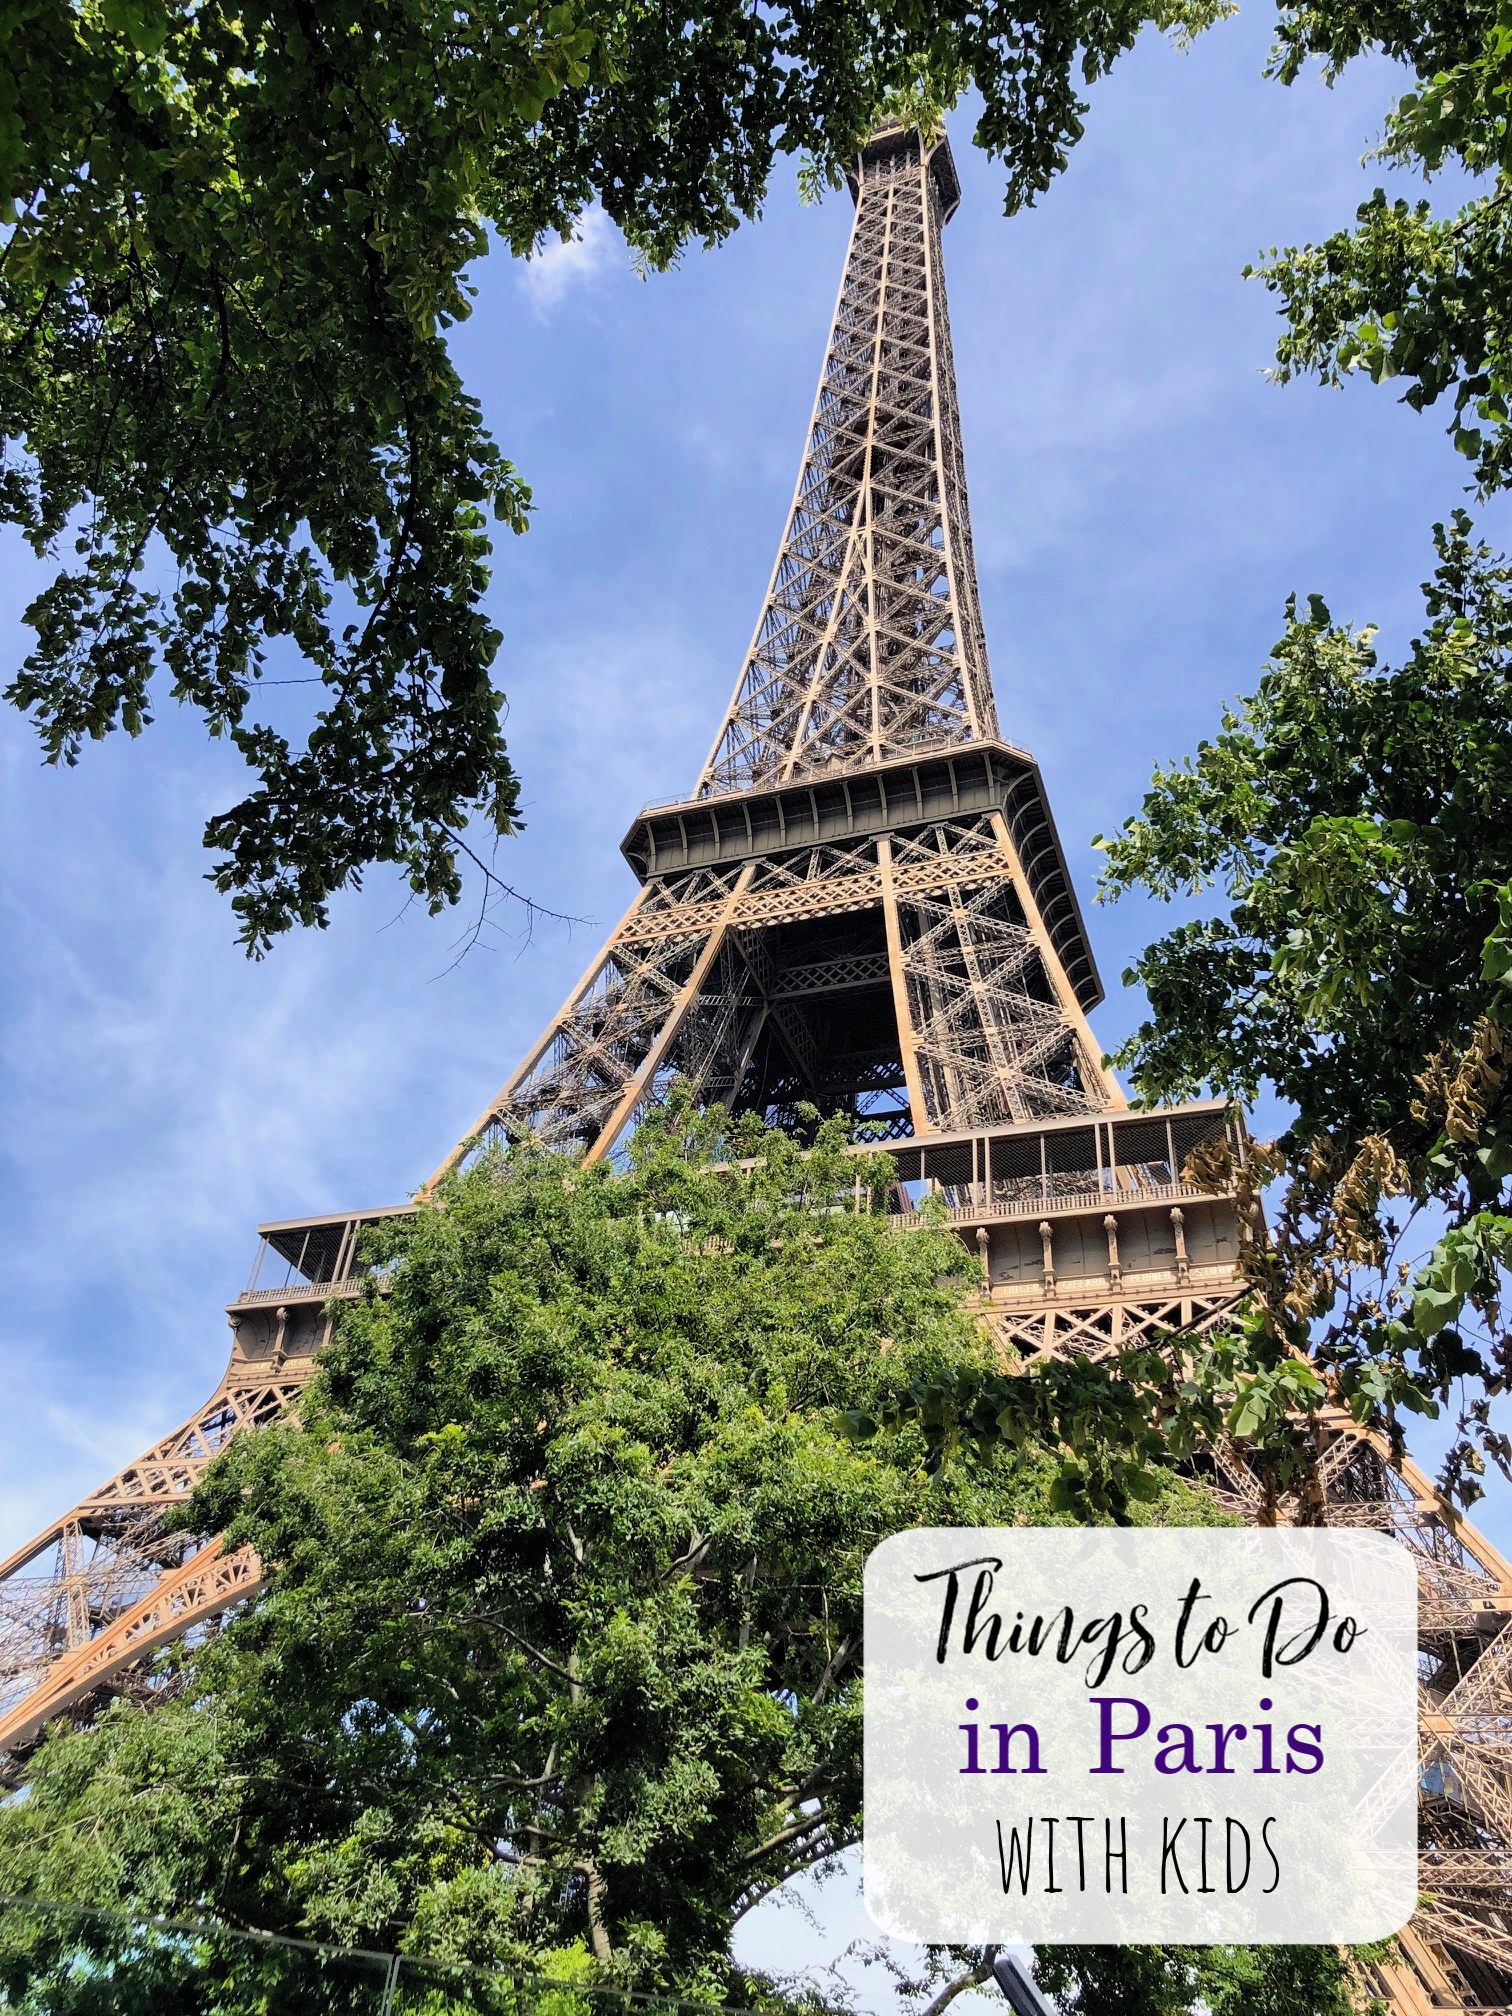 Things to do in Paris with Kids-If you're planning a trip to France with kids in tow, these fun things to do in Paris with kids will help you make the most of your trip. #travel #travelwithkids #paris #france